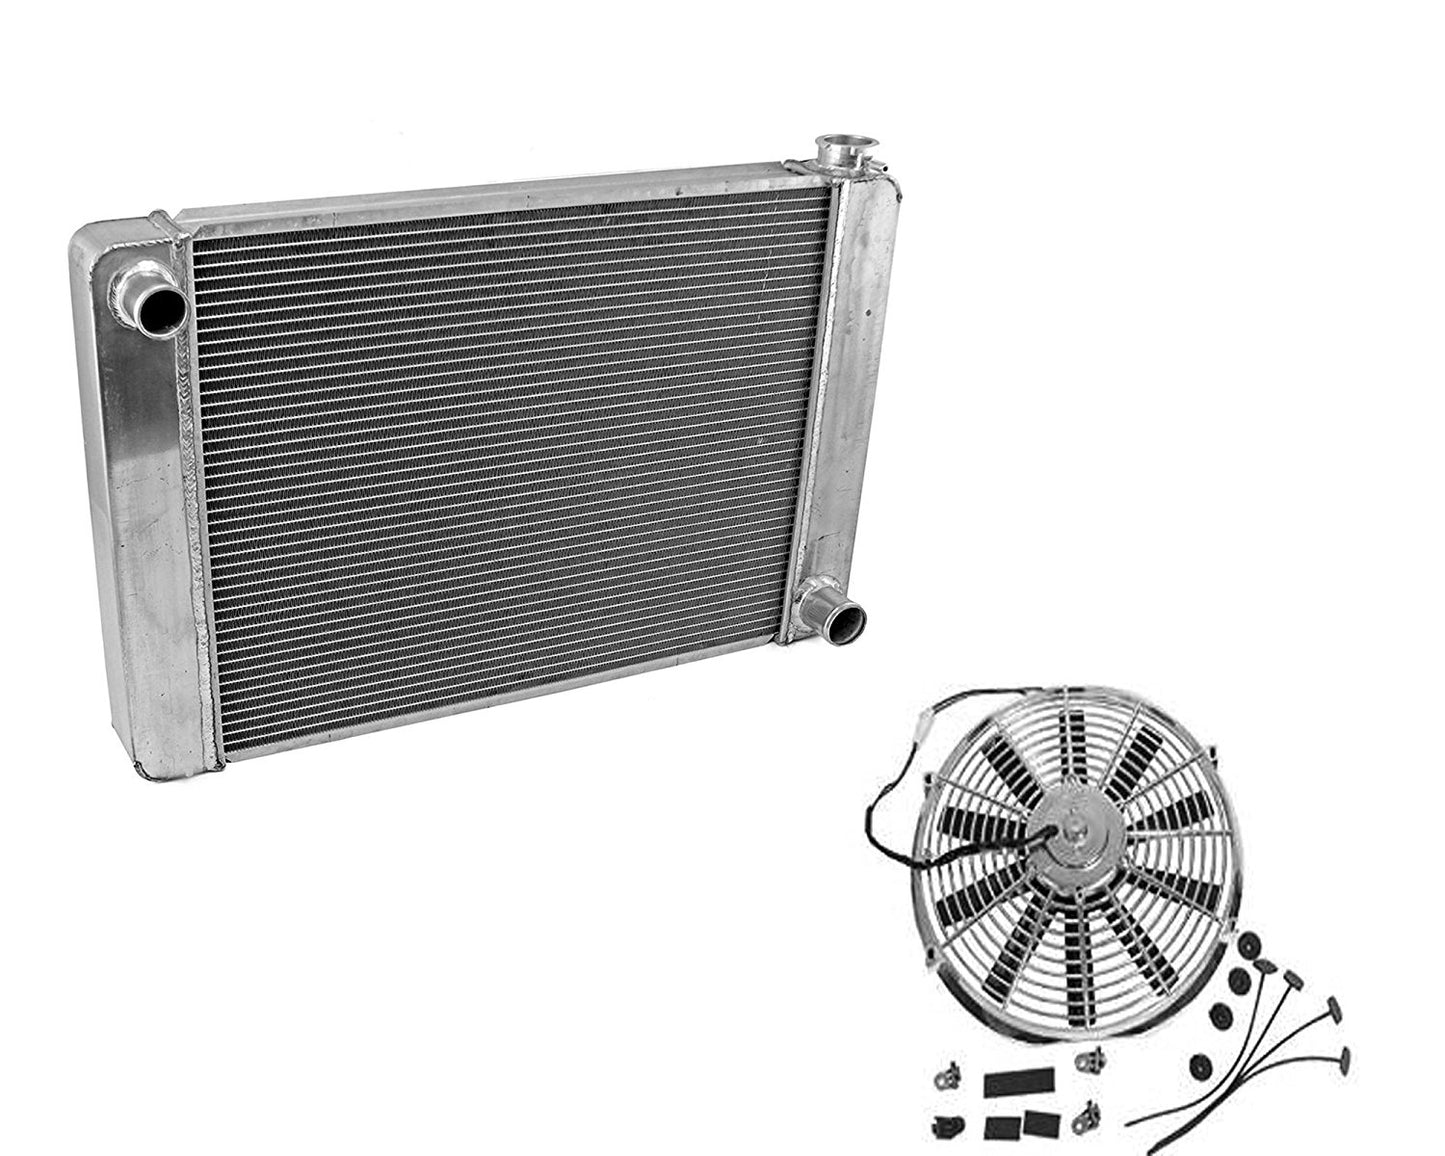 Fabricated Aluminum Radiator 30" x 19" x3" Overall For SBC BBC Chevy GM & 12" Chrome Straight Blade Reversible Cooling Fan